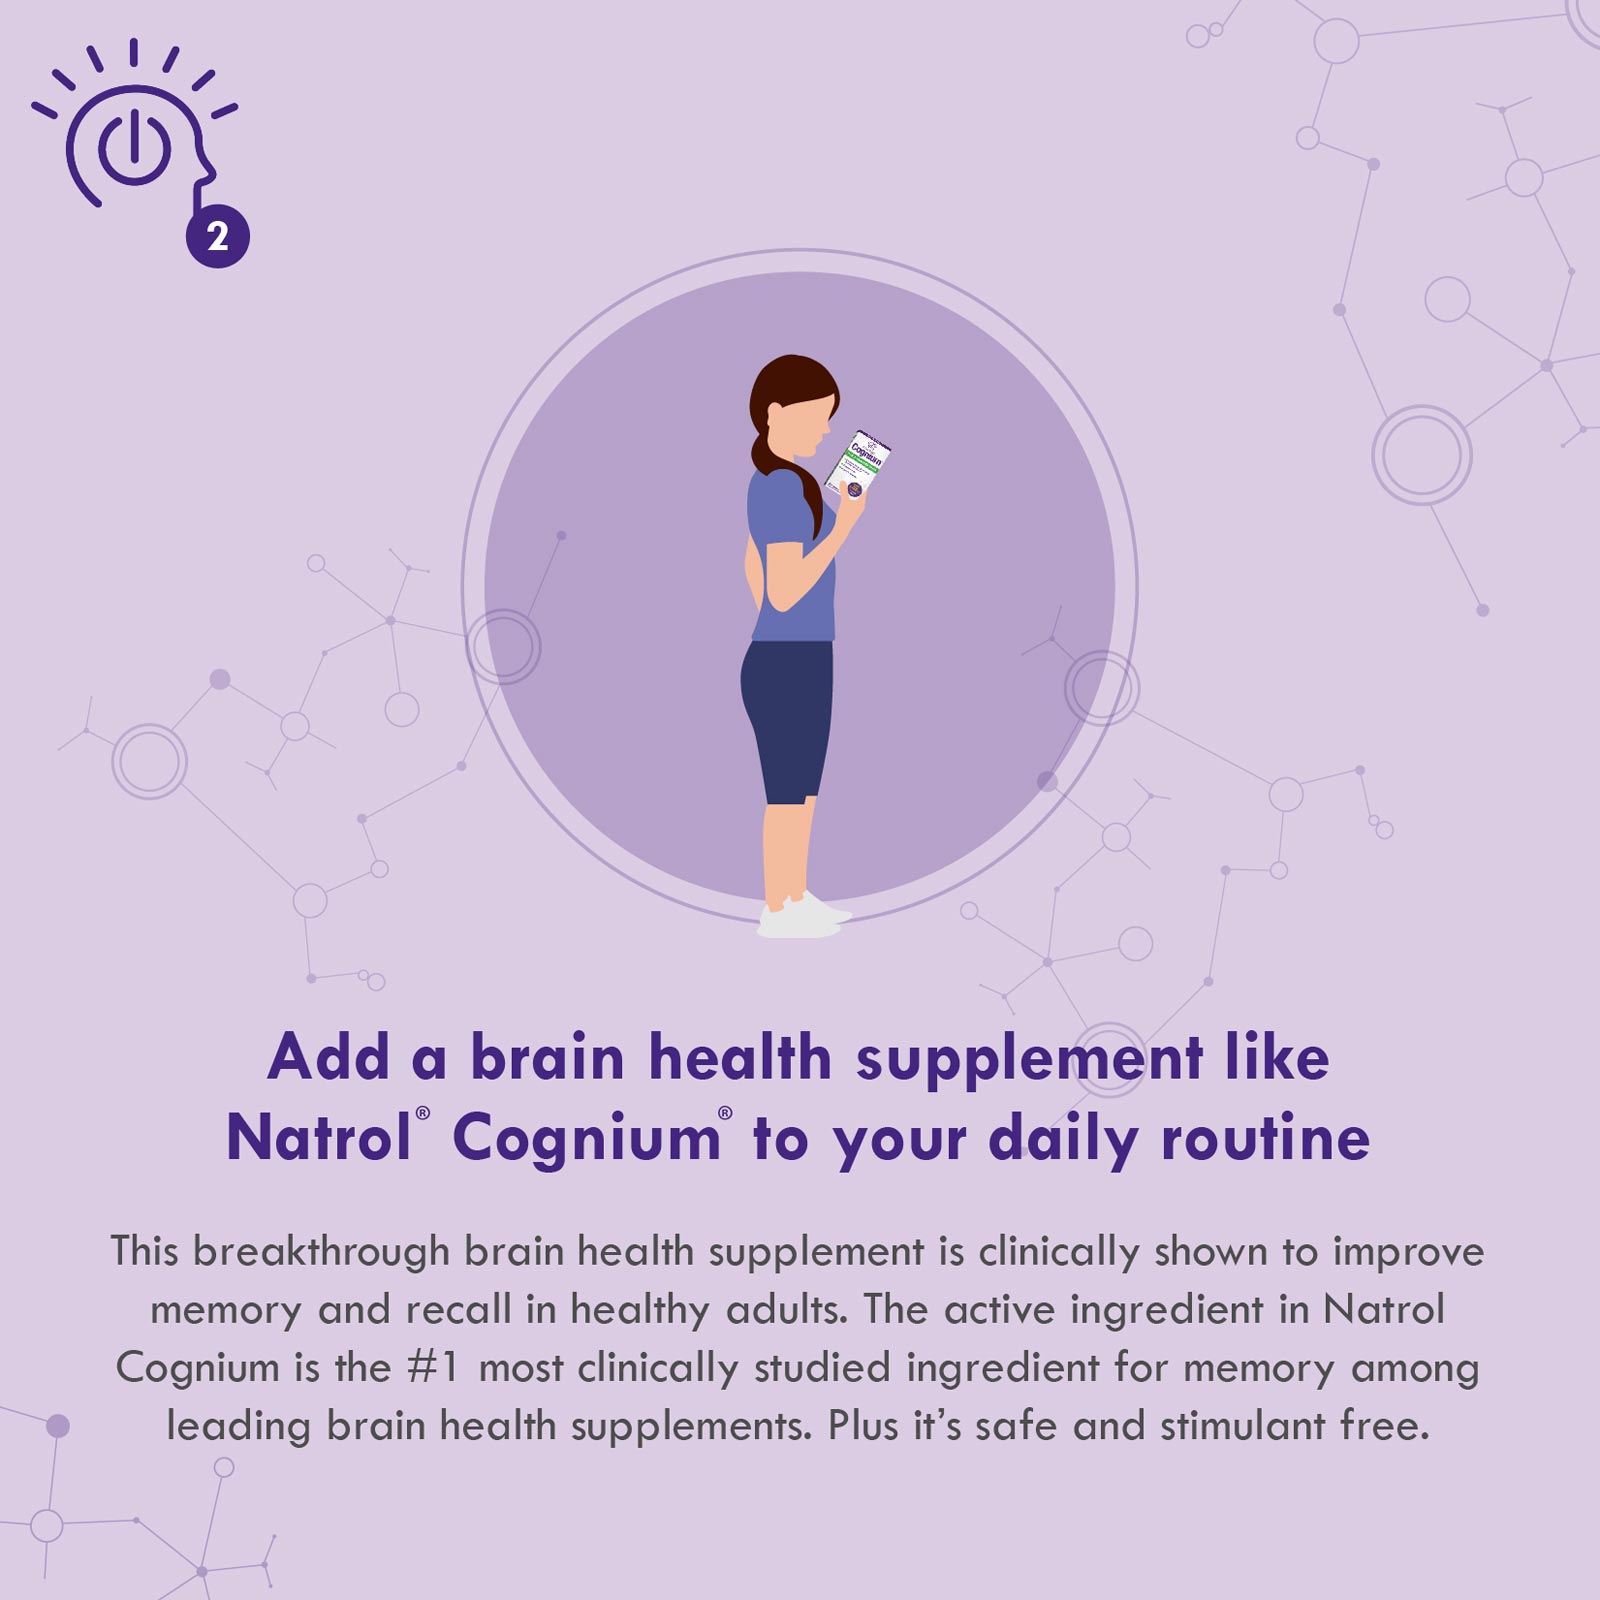 Natrol “Add a brain health supplement like Natrol® Cognium® to your daily routine”